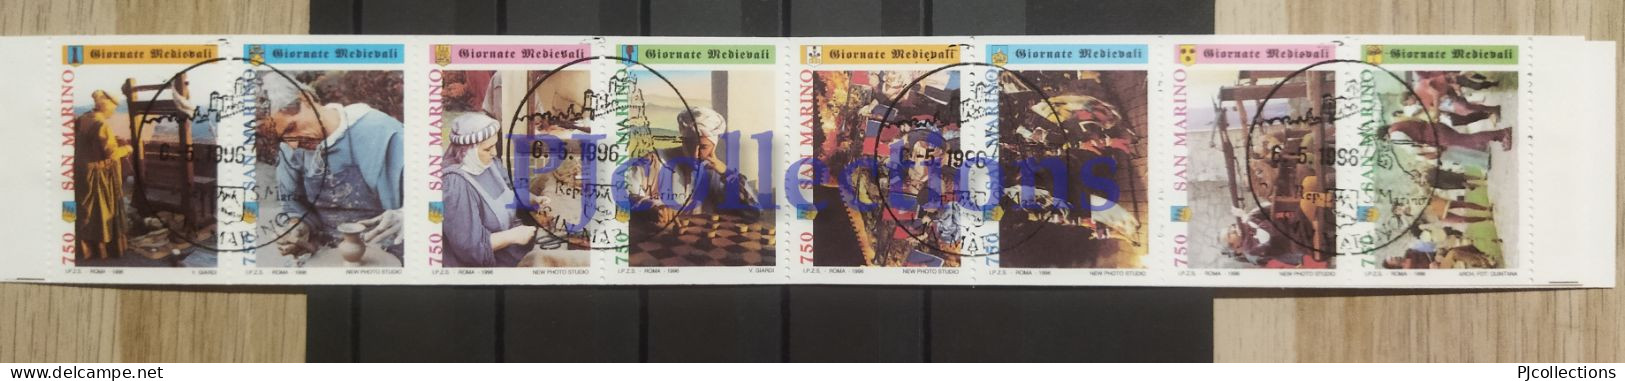 4578-SAN MARINO 1996 GIORNATE MEDIEVALI - MEDIEVAL DAYS FULL BOOKLET 8 STAMPS C/ANNULLO 1° GIORNO - USED - Oblitérés